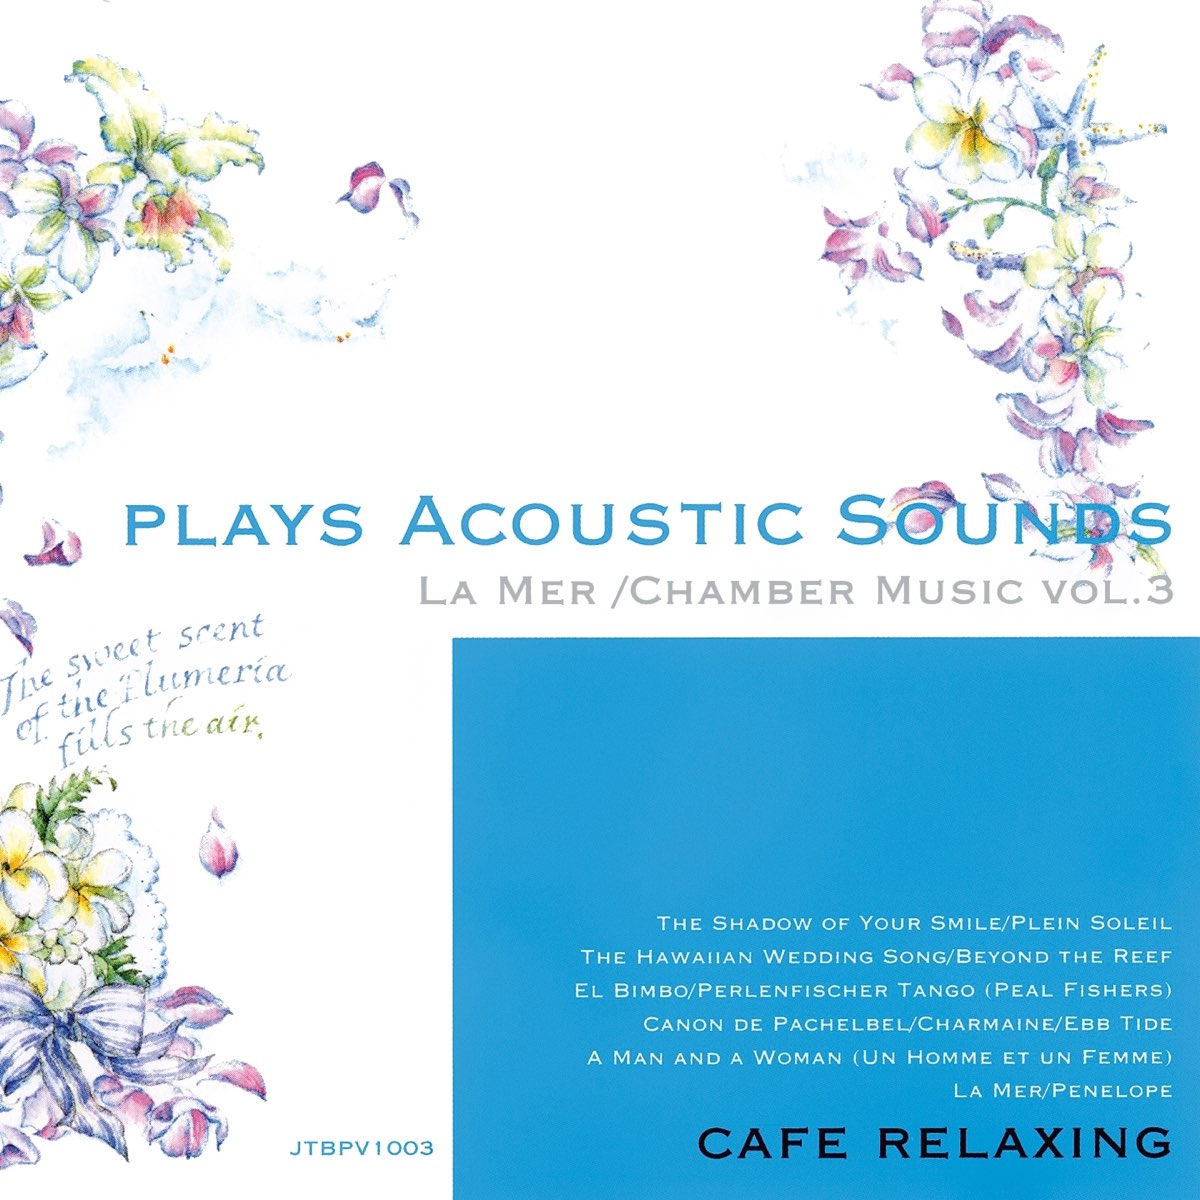 Plays Acoustic Sounds: La mer, Chamber Music, Vol. 3》- Orchestra Maffei ...